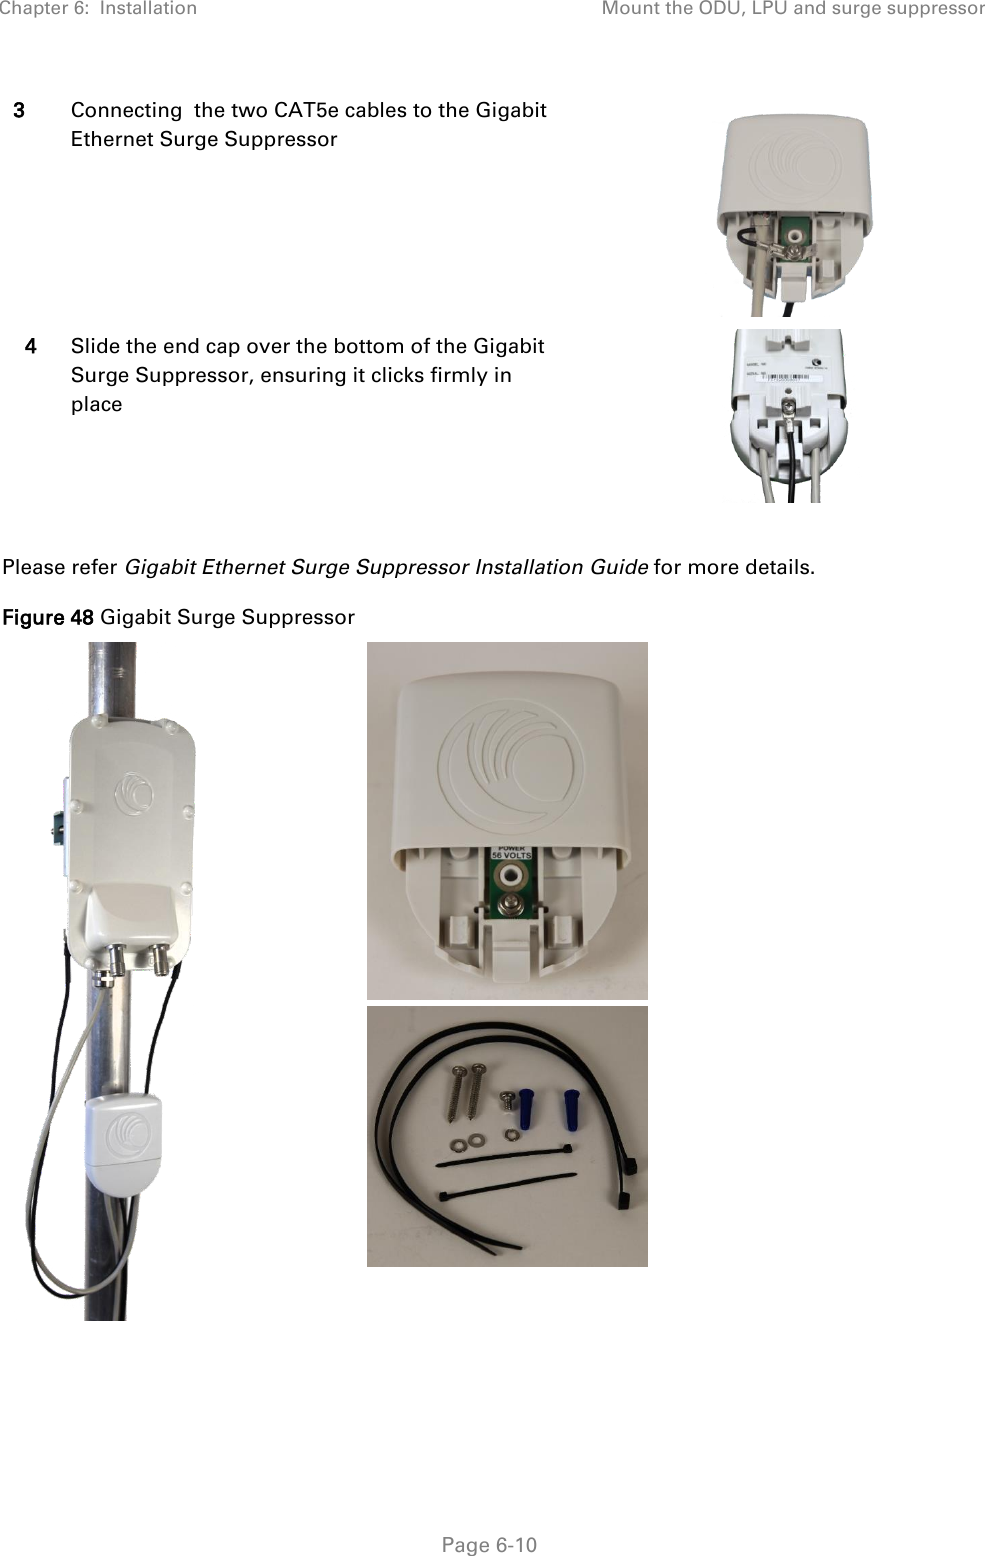 Chapter 6:  Installation Mount the ODU, LPU and surge suppressor   Page 6-10 3 Connecting  the two CAT5e cables to the Gigabit Ethernet Surge Suppressor  4 Slide the end cap over the bottom of the Gigabit Surge Suppressor, ensuring it clicks firmly in place   Please refer Gigabit Ethernet Surge Suppressor Installation Guide for more details. Figure 48 Gigabit Surge Suppressor      